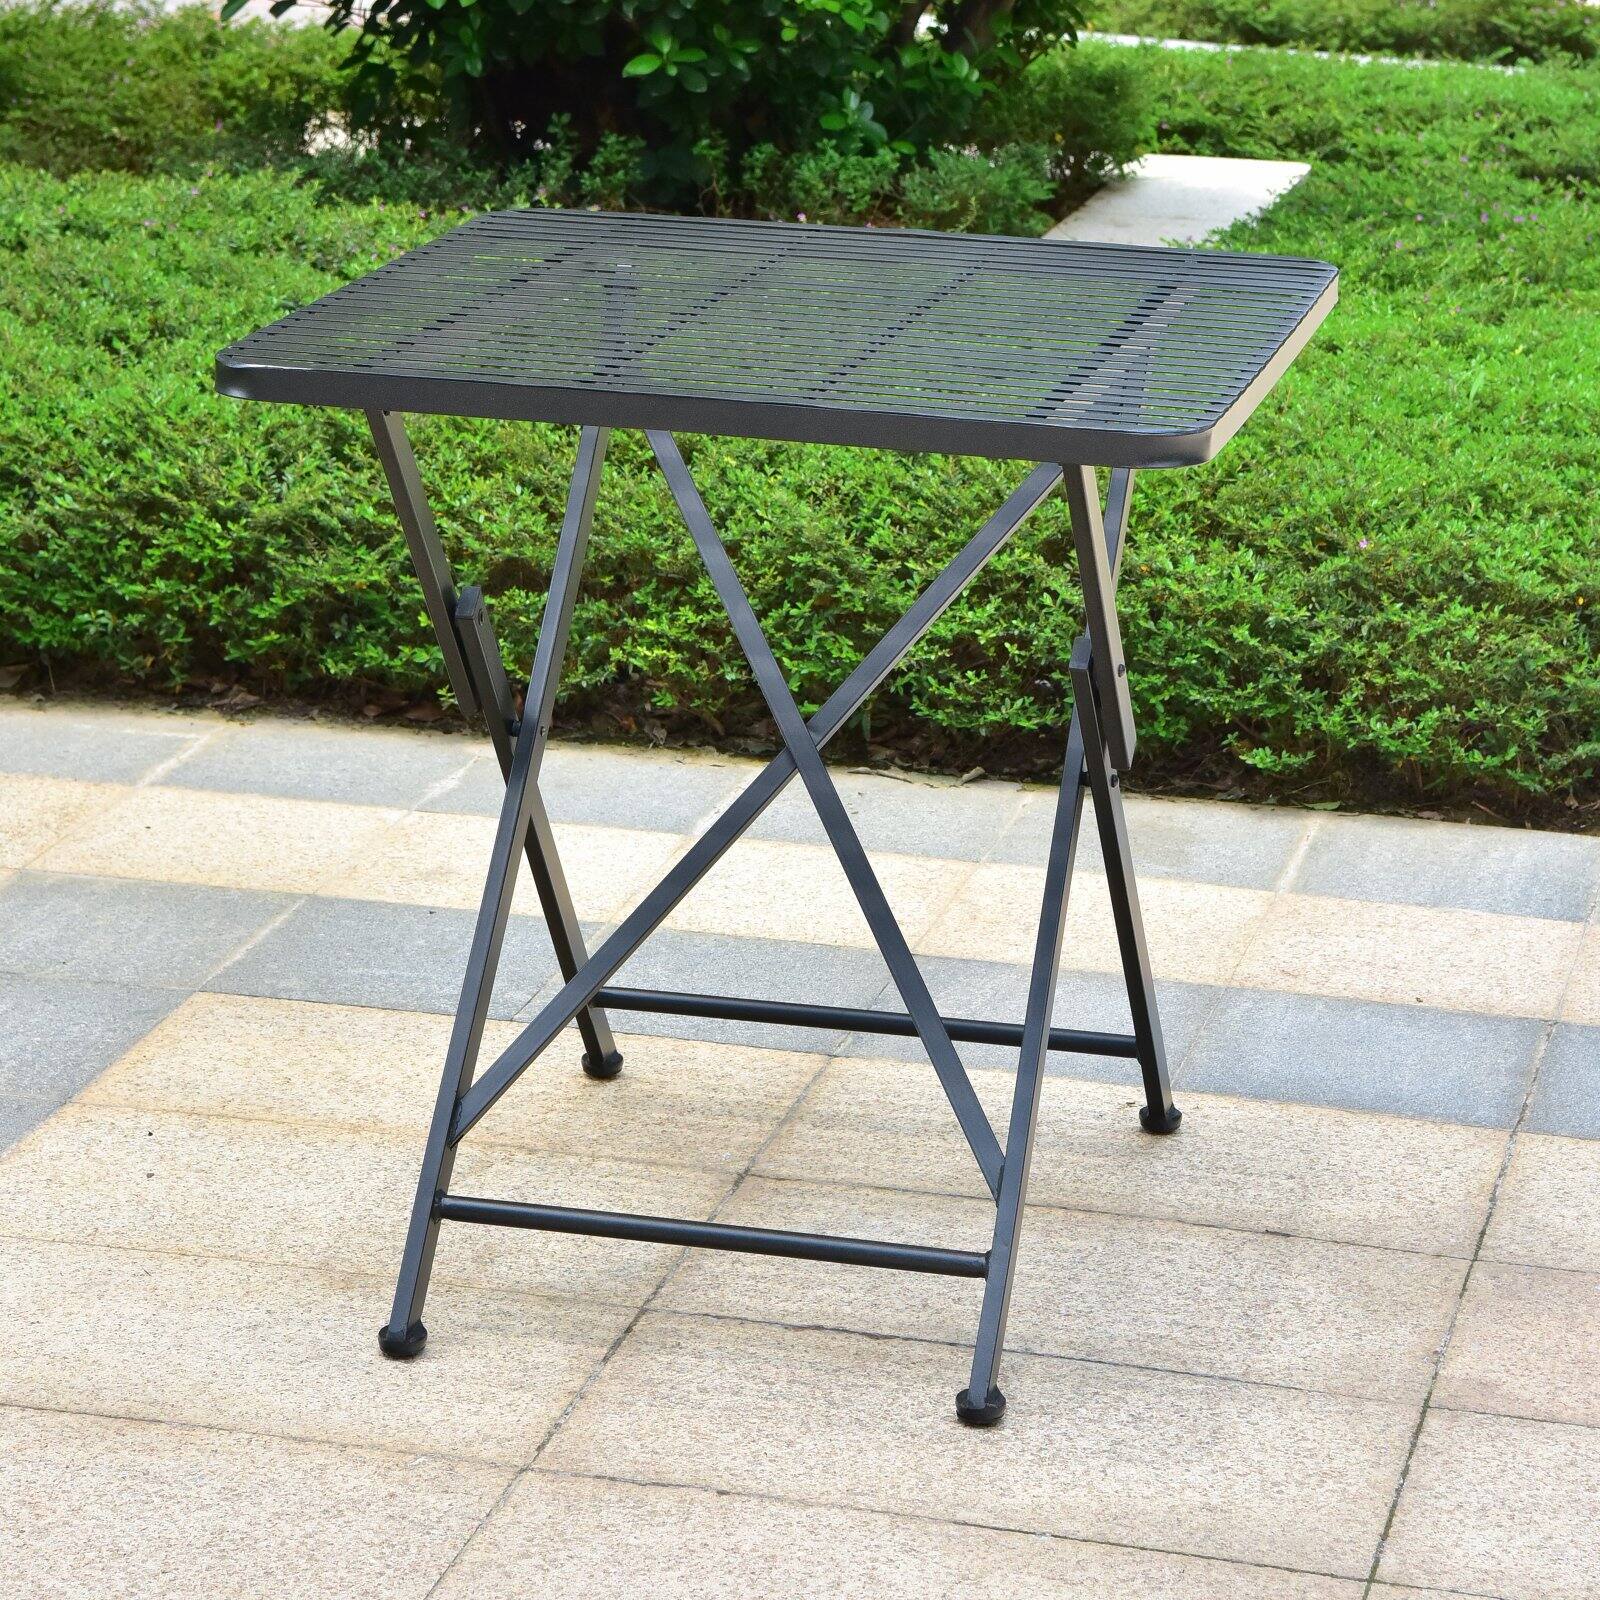 Mandalay Outdoor Iron 28-inch Folding Square Bistro Table - image 2 of 2